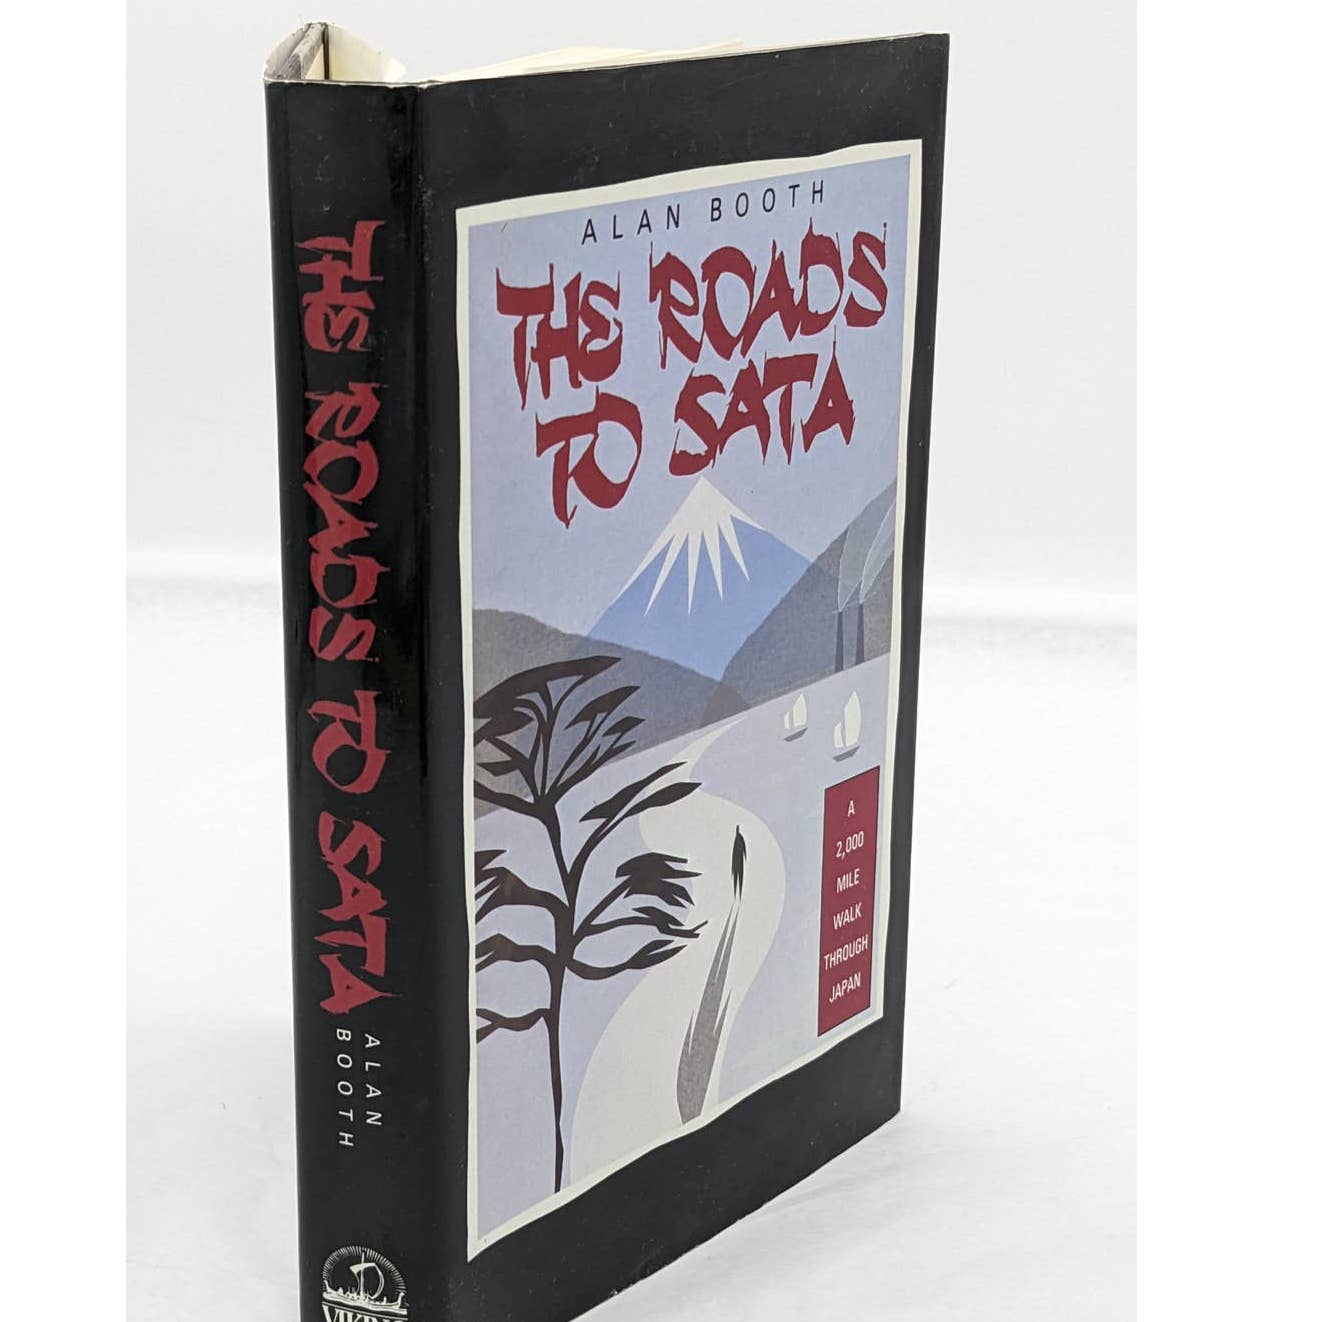 Roads To Sata A 2000-Mile Walk Through Japan By Alan Booth Travel Vintage 1985